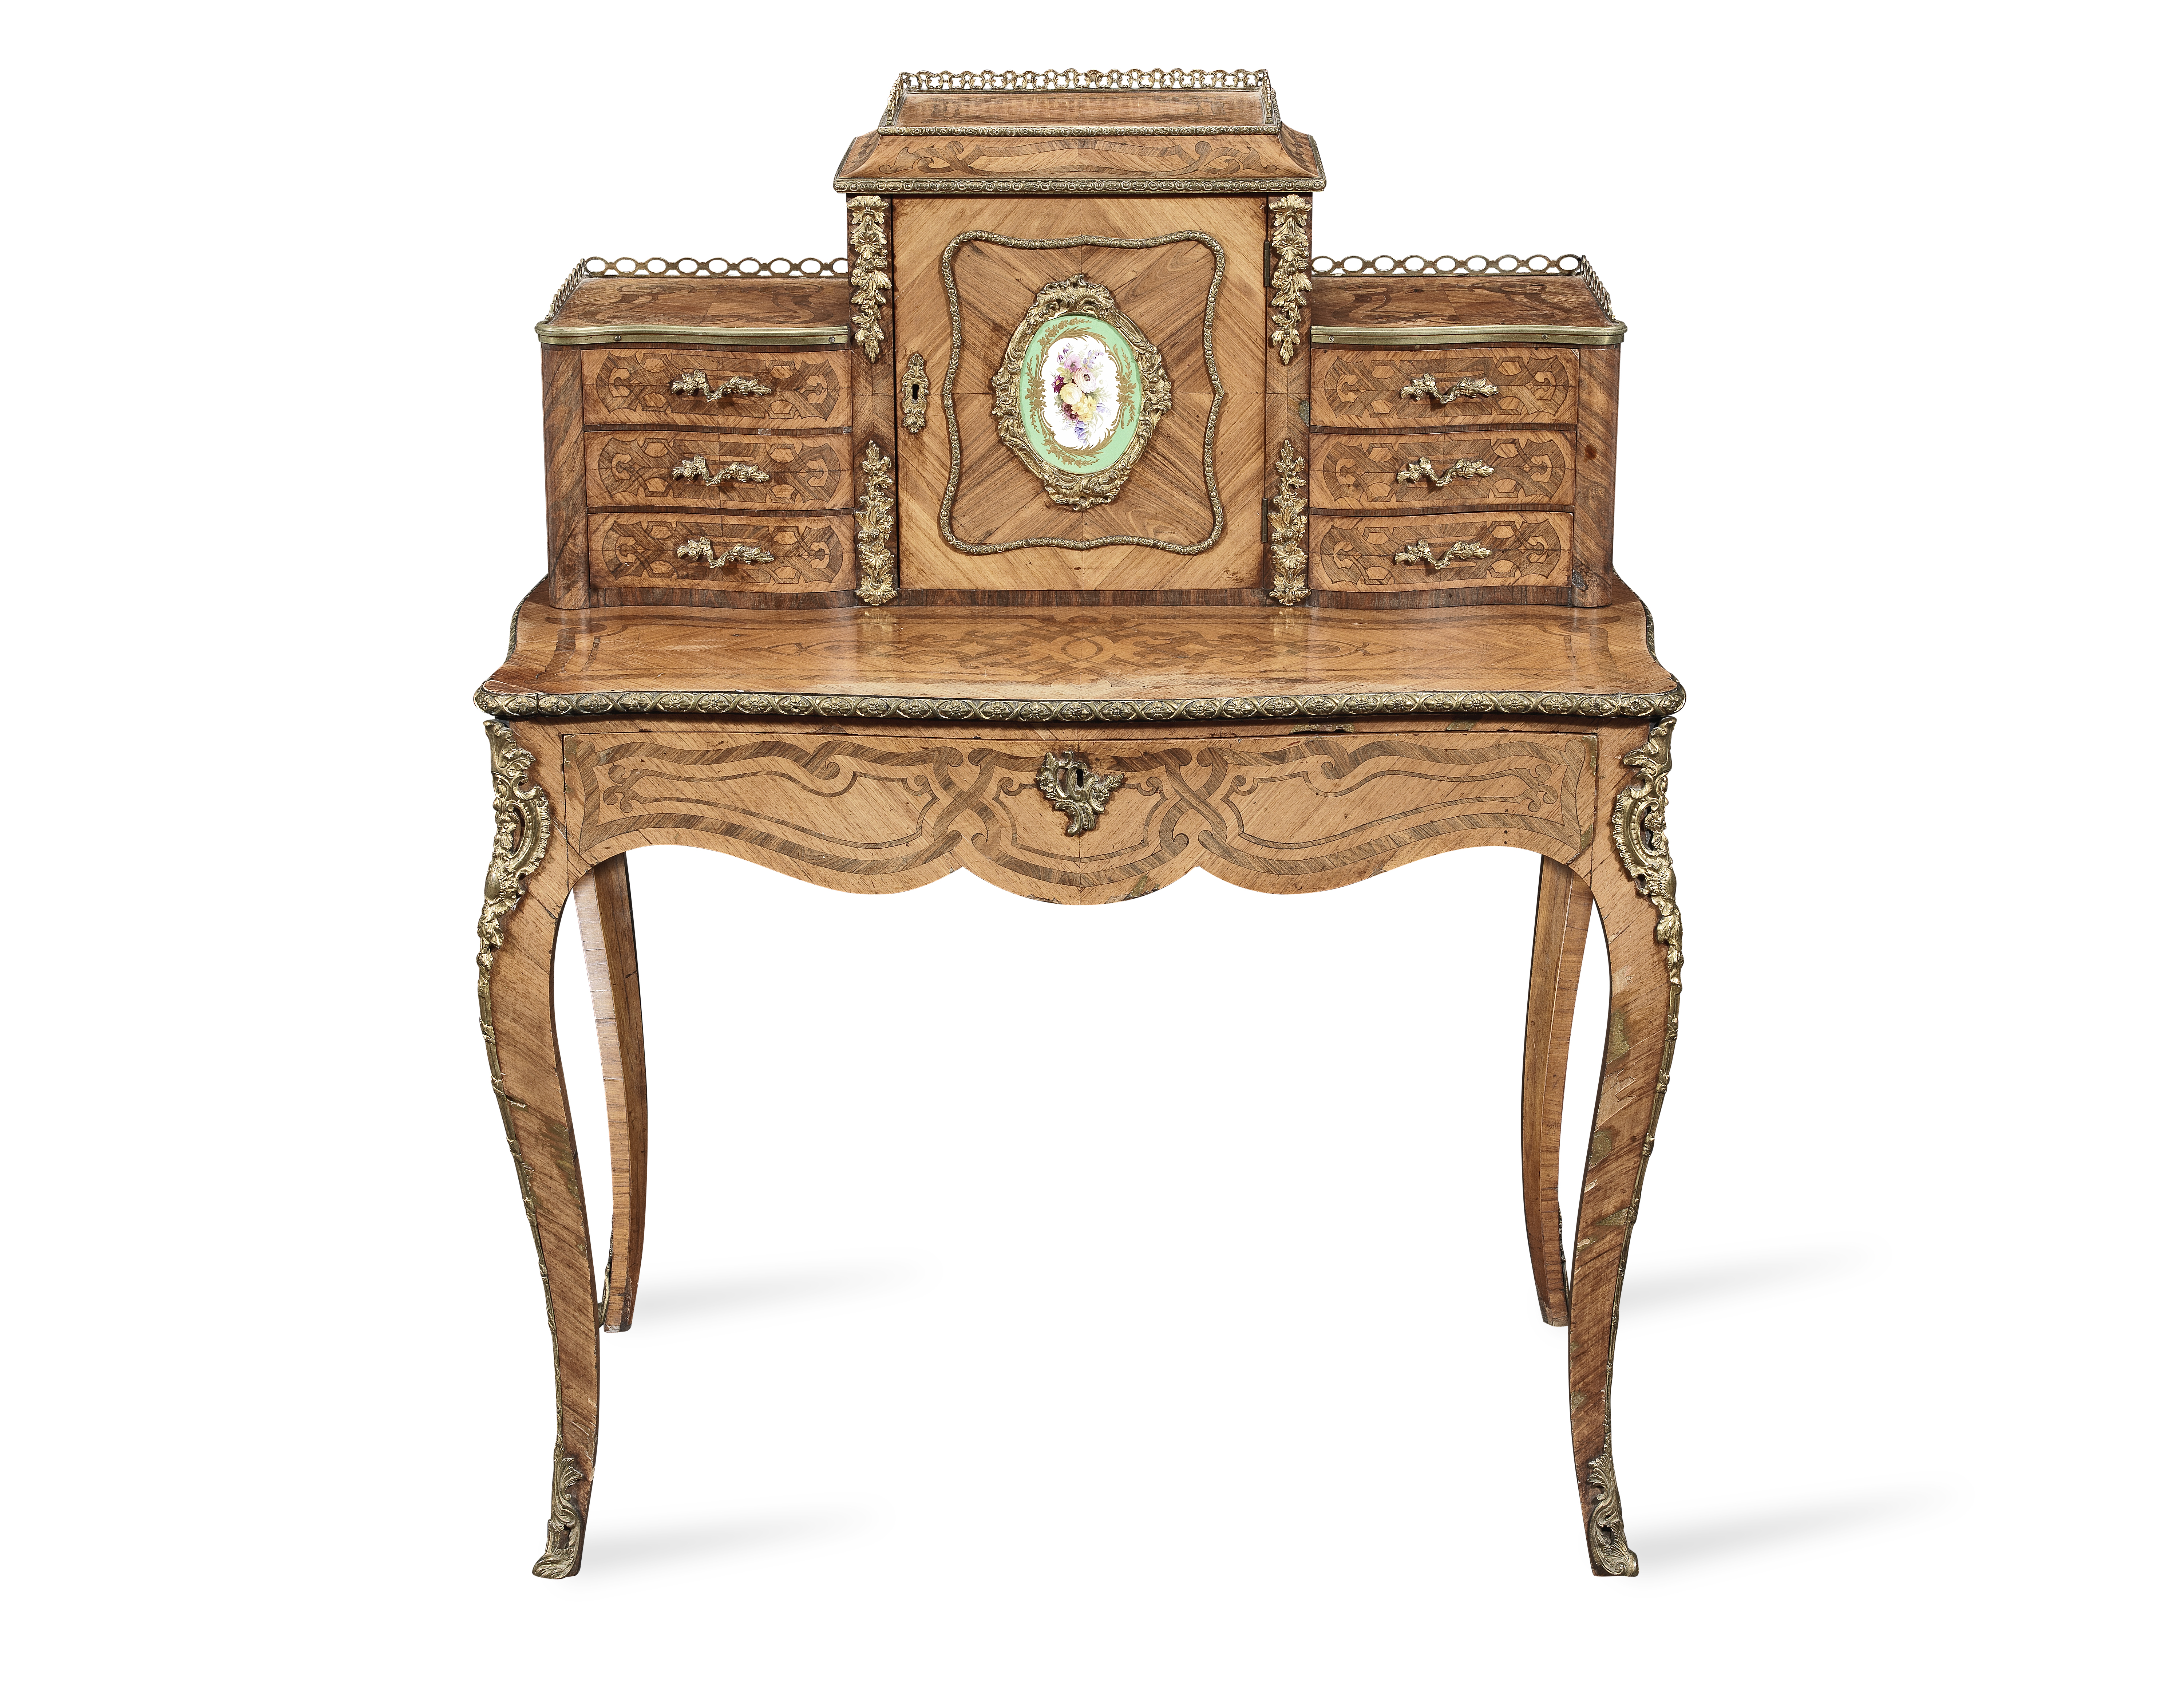 An early Victorian ormolu and porcelain mounted tulipwood and kingwood bonheur du jour in the Fr...